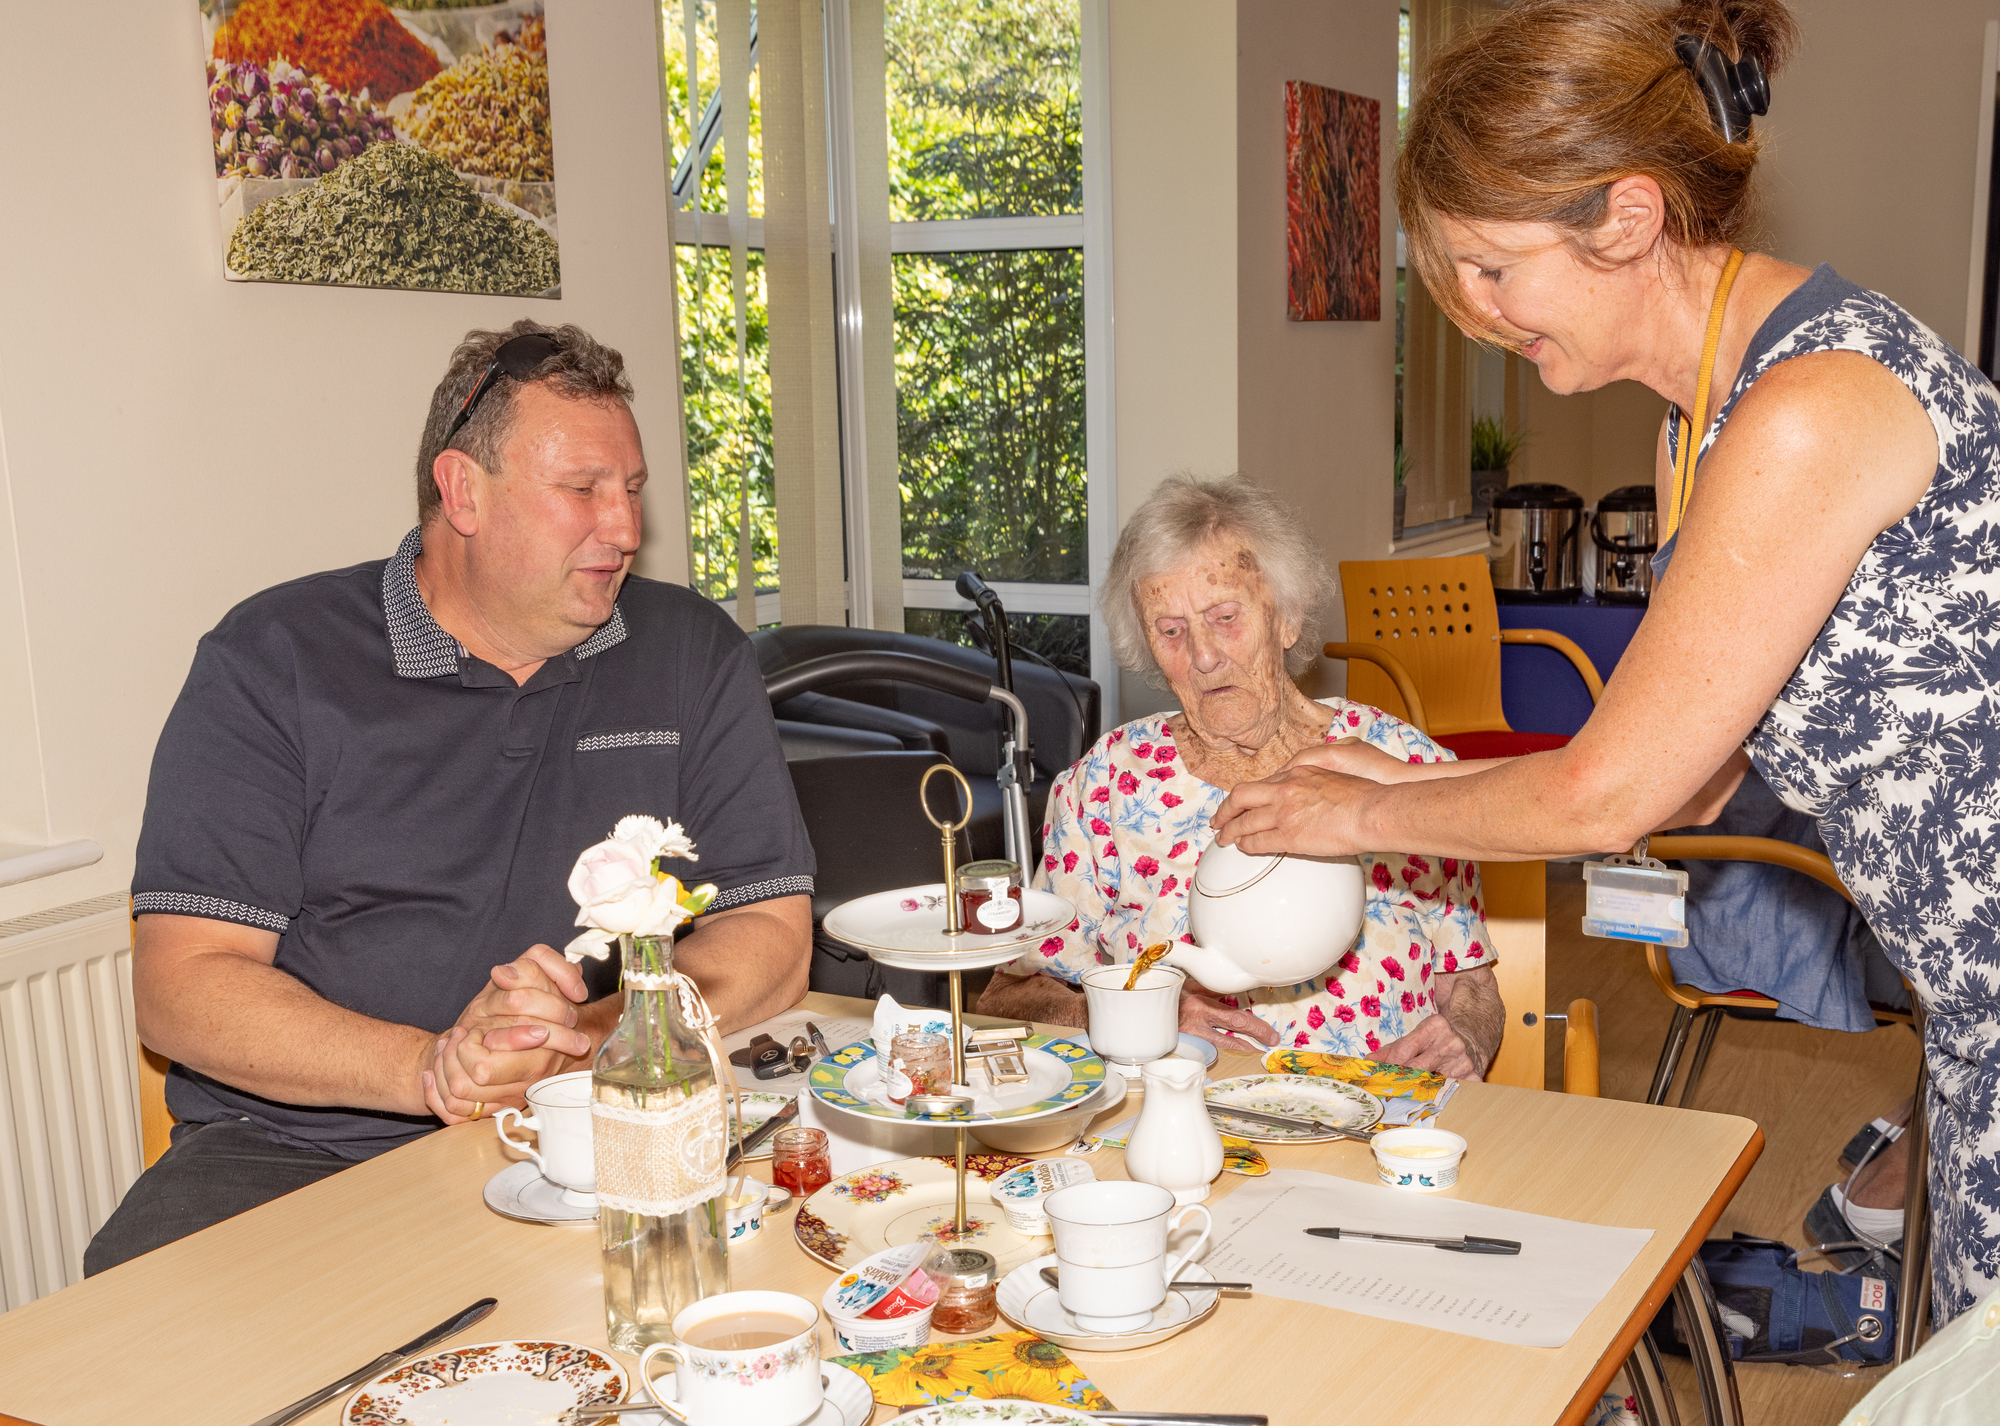 Marion serving tea to Chris and family (cropped)